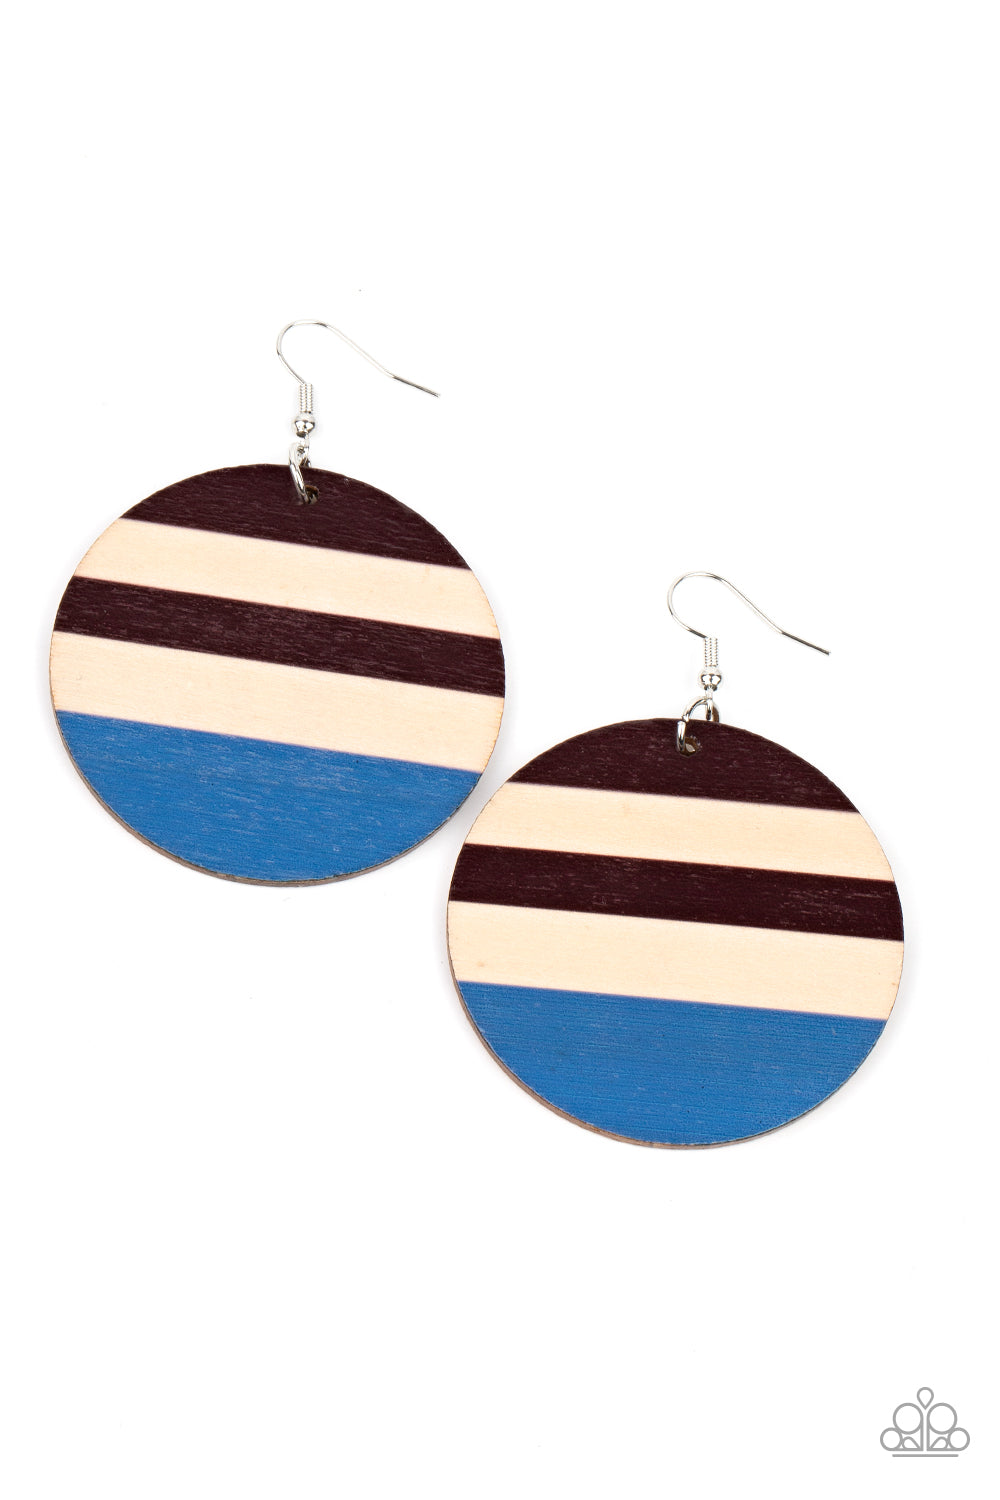 Yacht Party - Blue Brown & Tan Wood Earrings - Princess Glam Shop